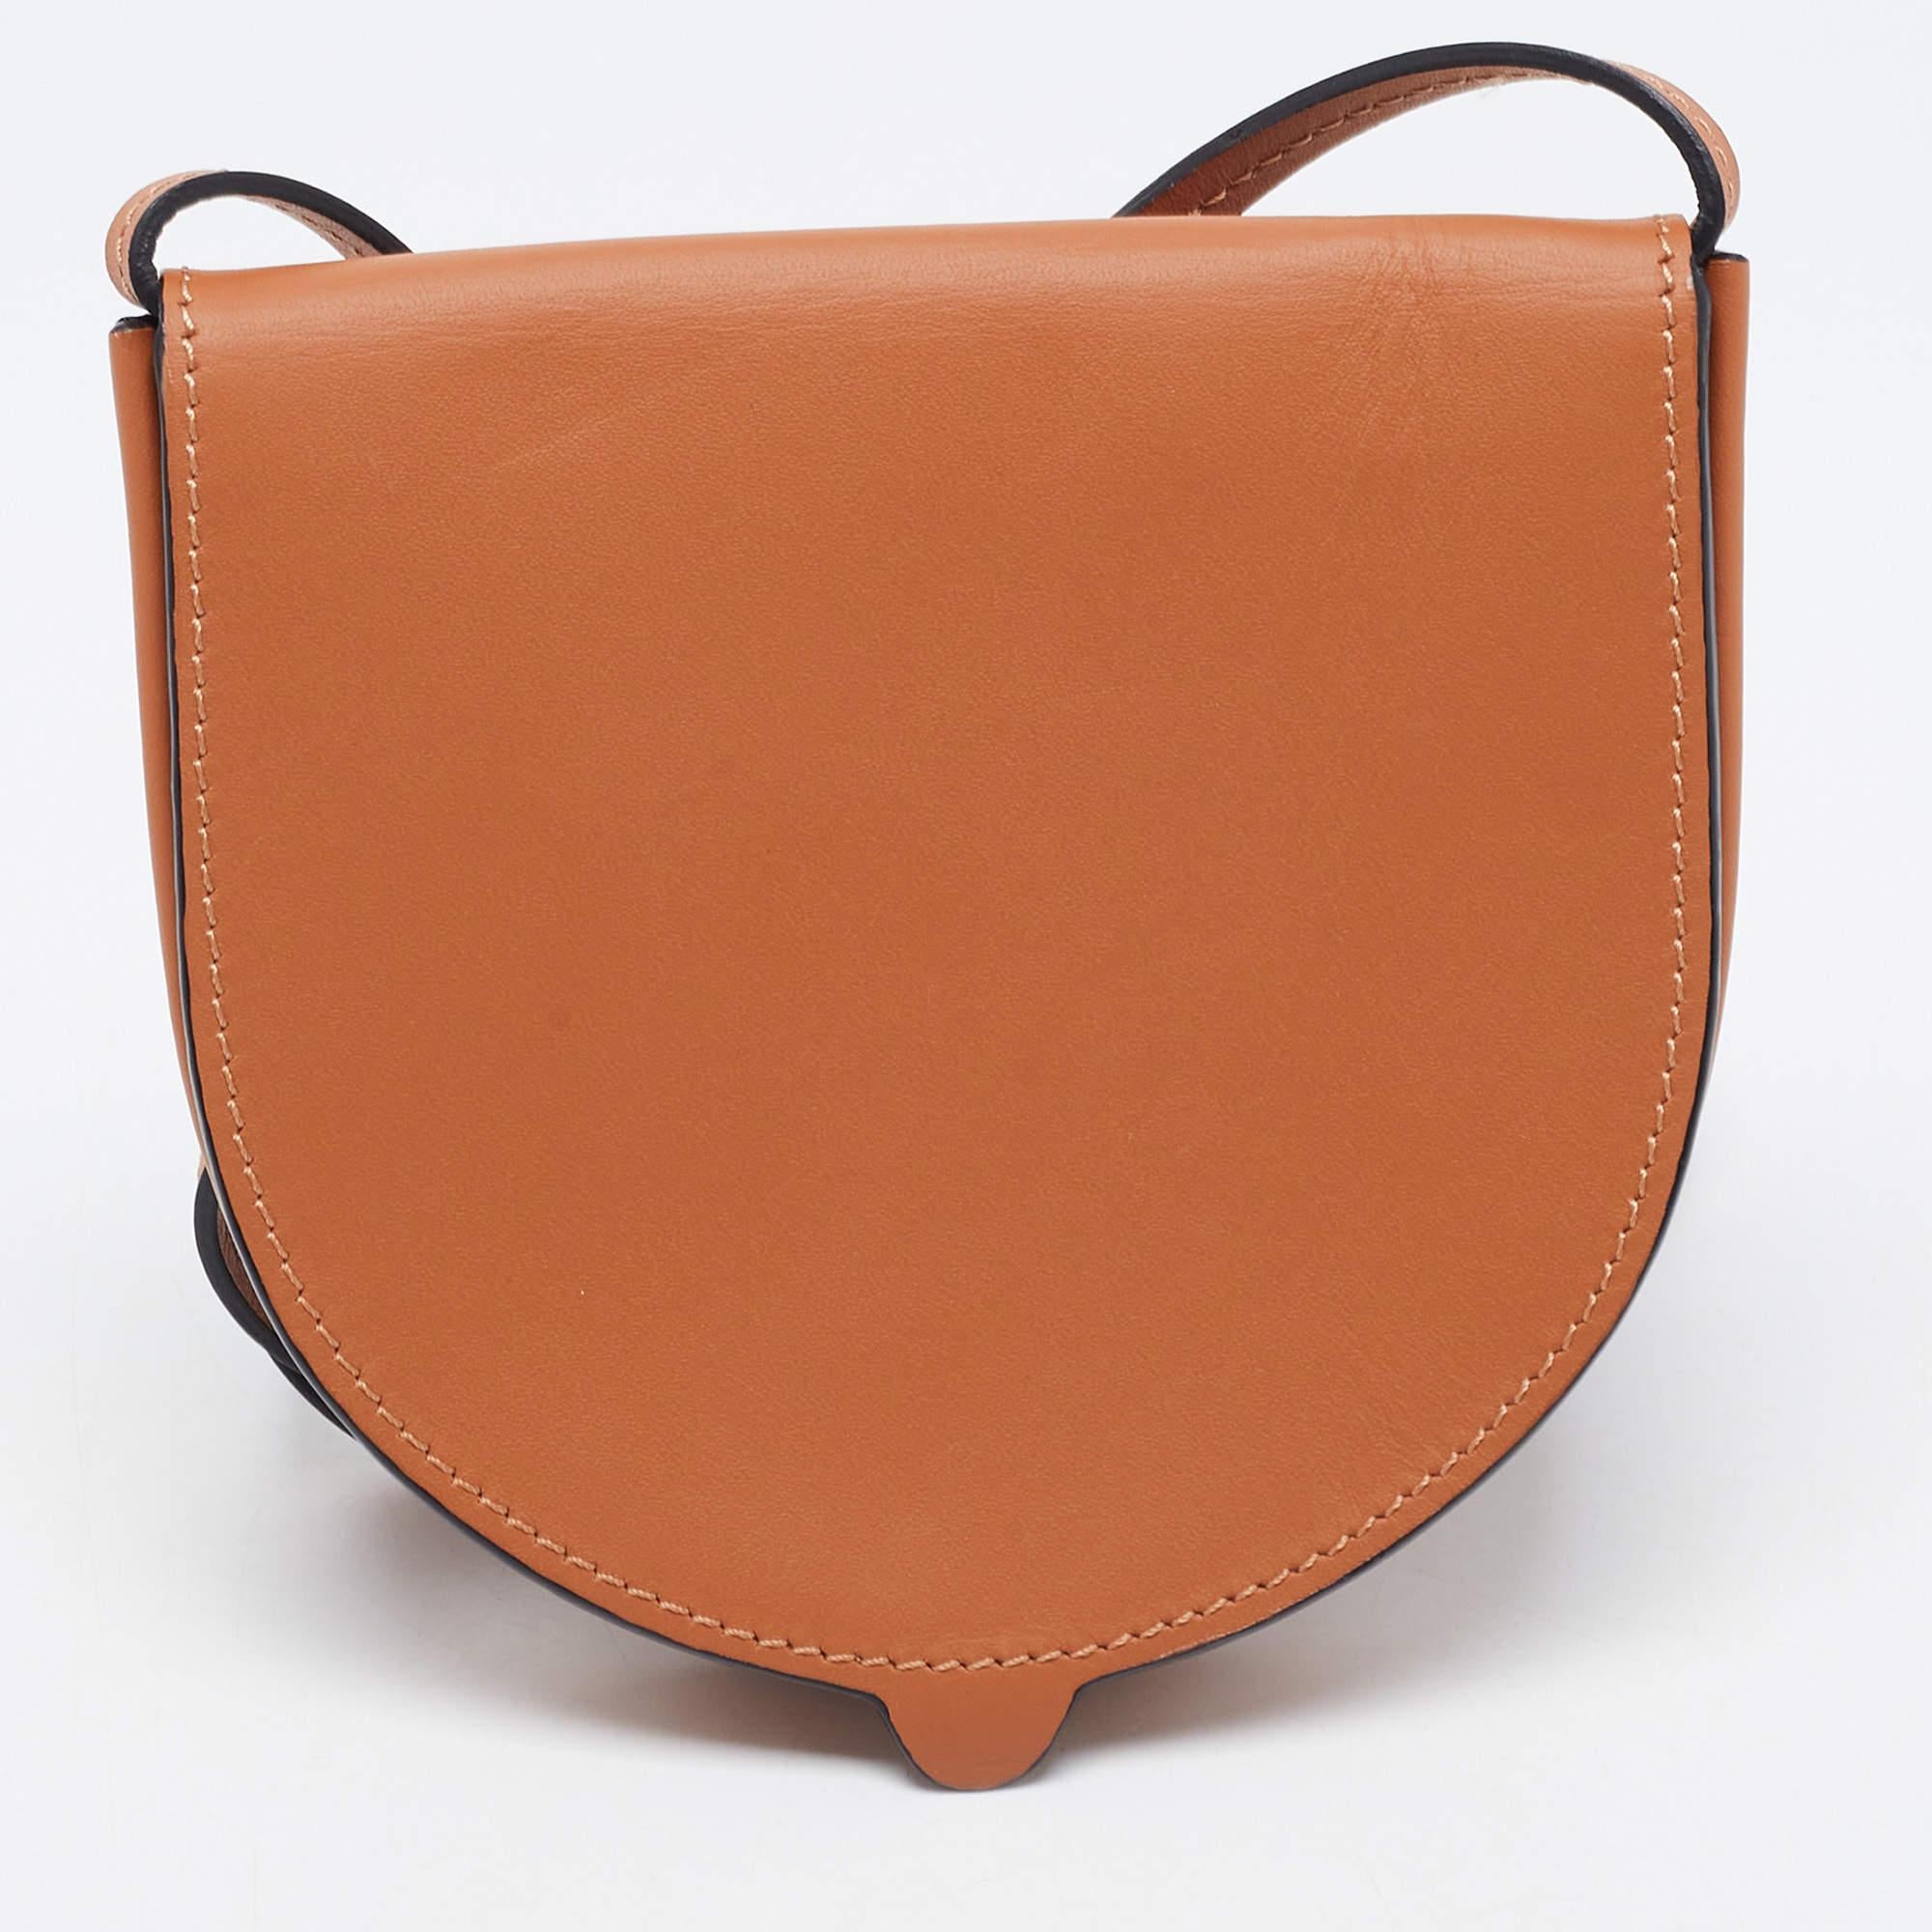 The Loewe bag is a stylish and compact accessory. Made from high-quality tan leather, it features a unique heel-shaped design. This mini bag is perfect for carrying small essentials and adds a touch of sophistication to any outfit with its sleek and